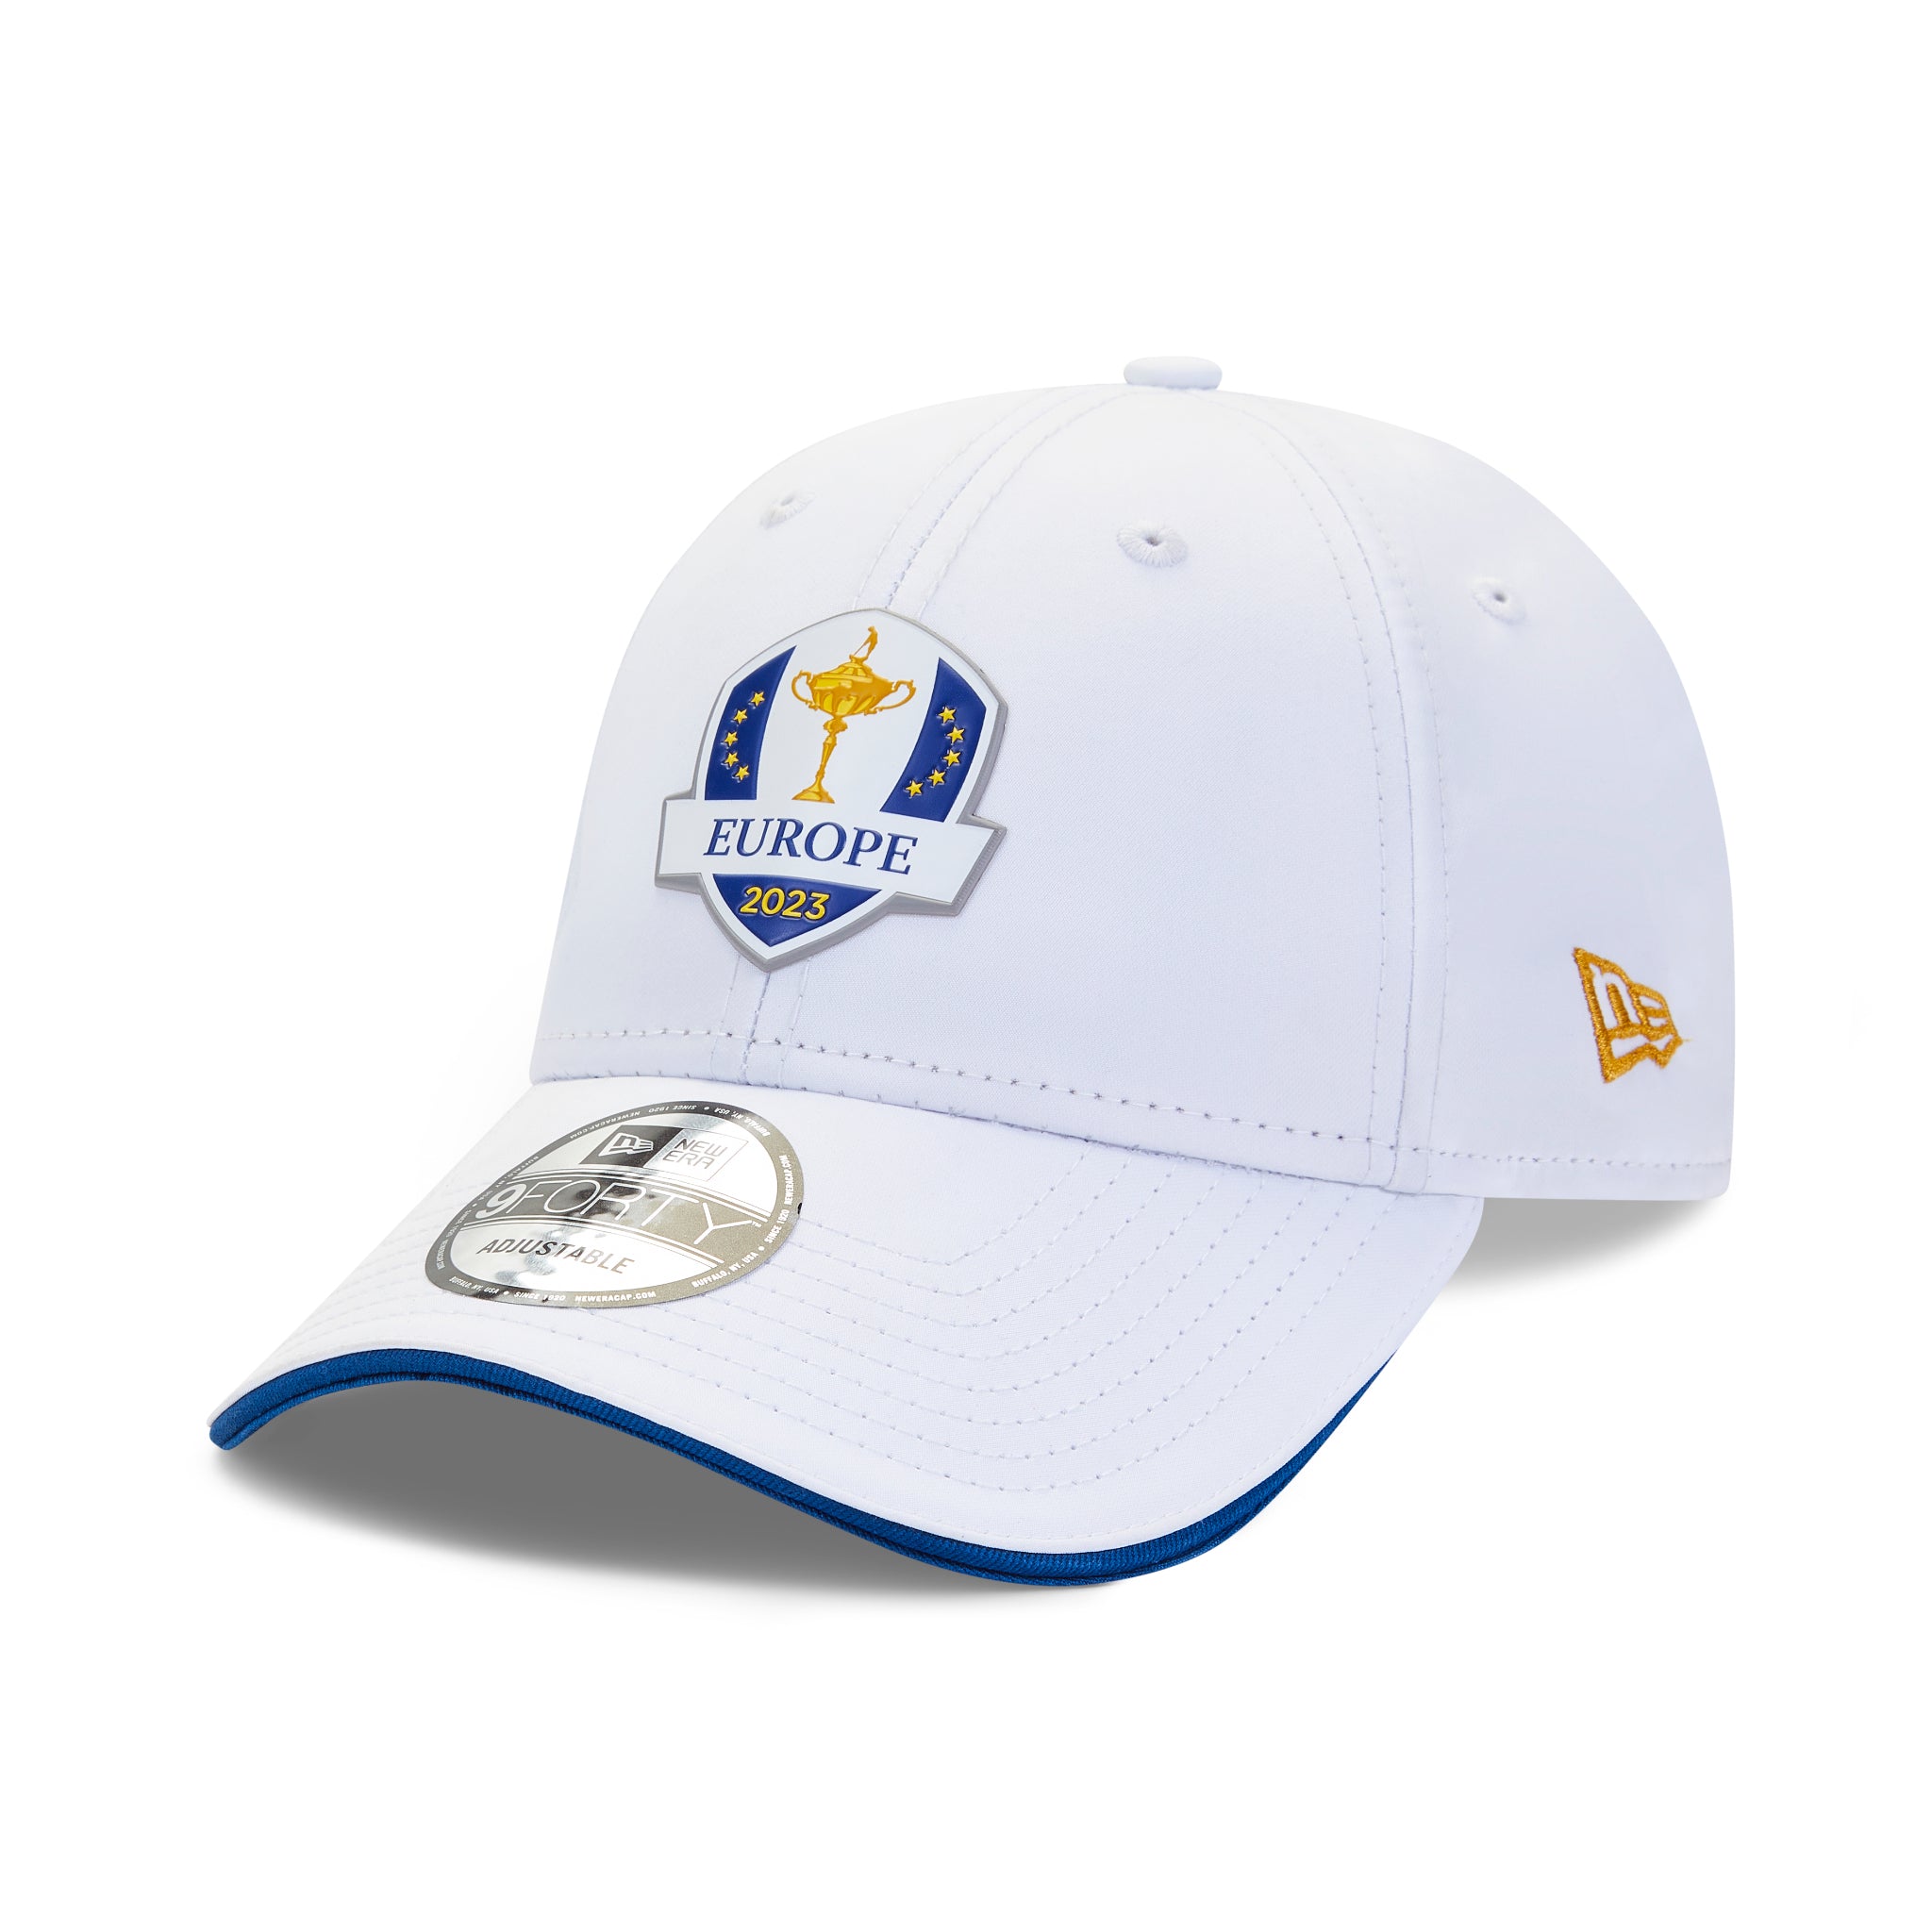 Ryder Cup Hats & Beanies For Sale The Official European Ryder Cup Shop